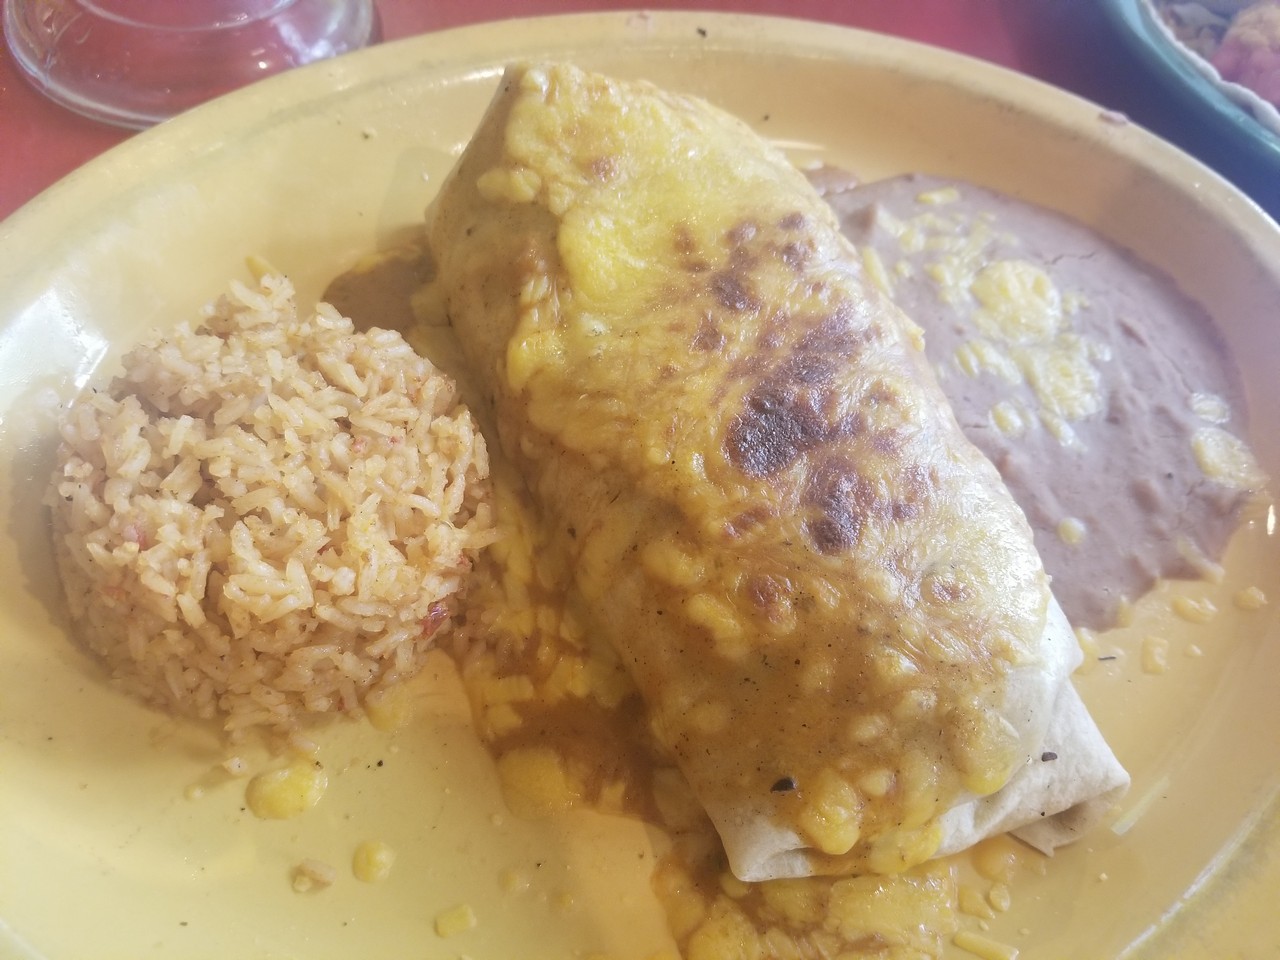 a plate of food with rice and burrito